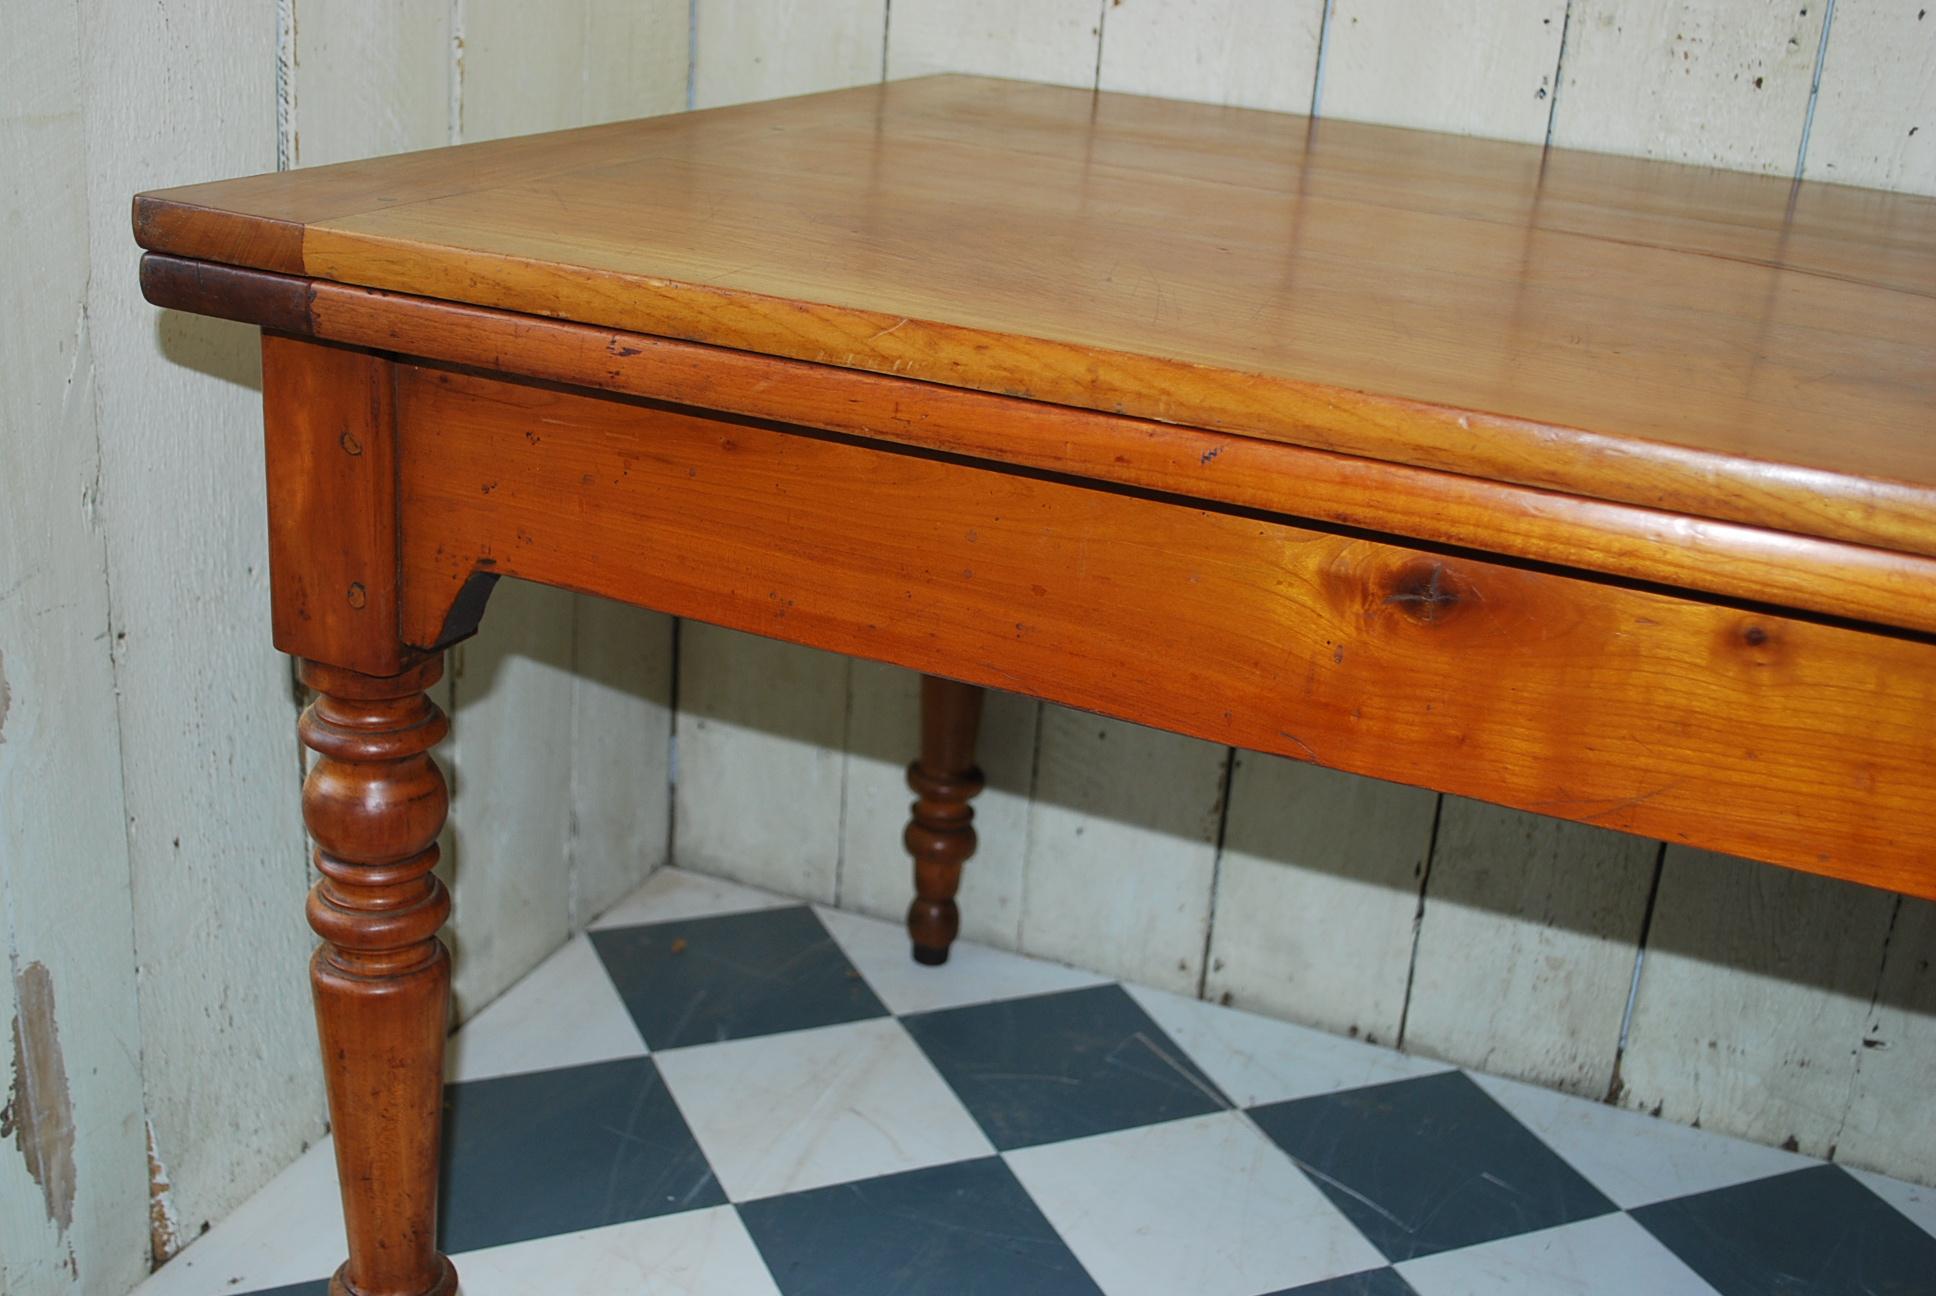 French Provincial Antique French 19th Century Cherrywood Extending Farmhouse Kitchen Dining Table For Sale